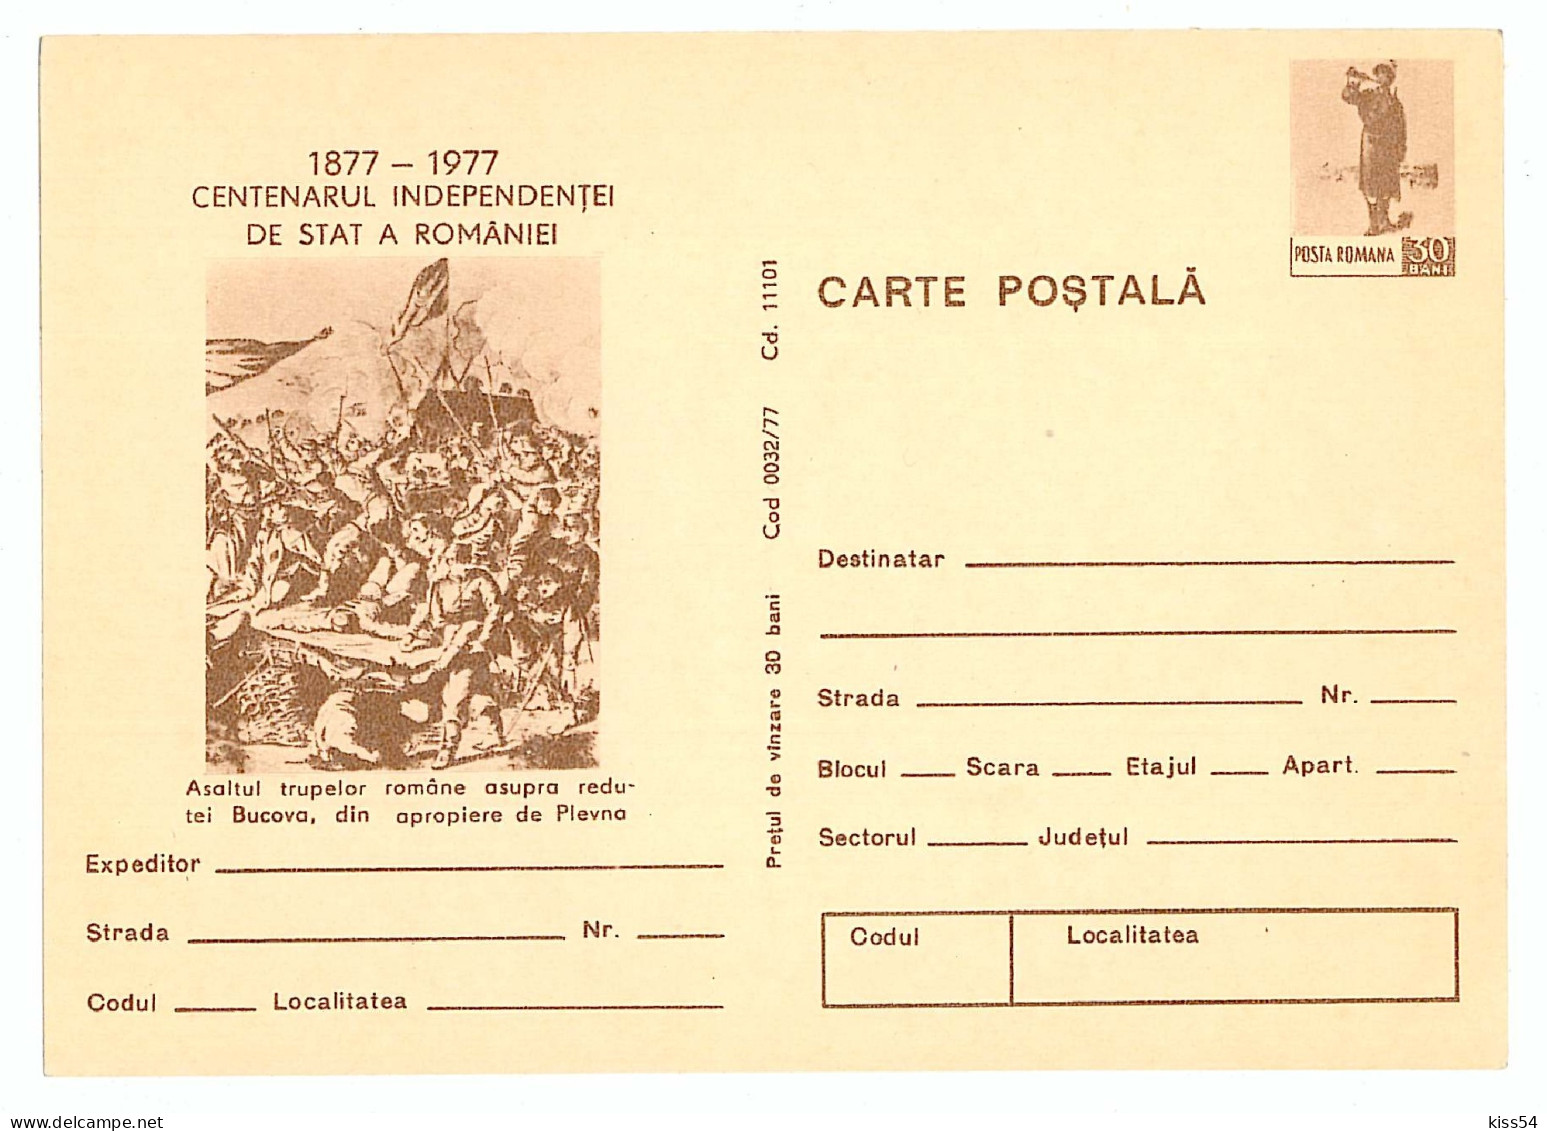 IP 77 A - 32a Centenary Independence Of Romania - Stationery - Unused - 1977 - Ganzsachen